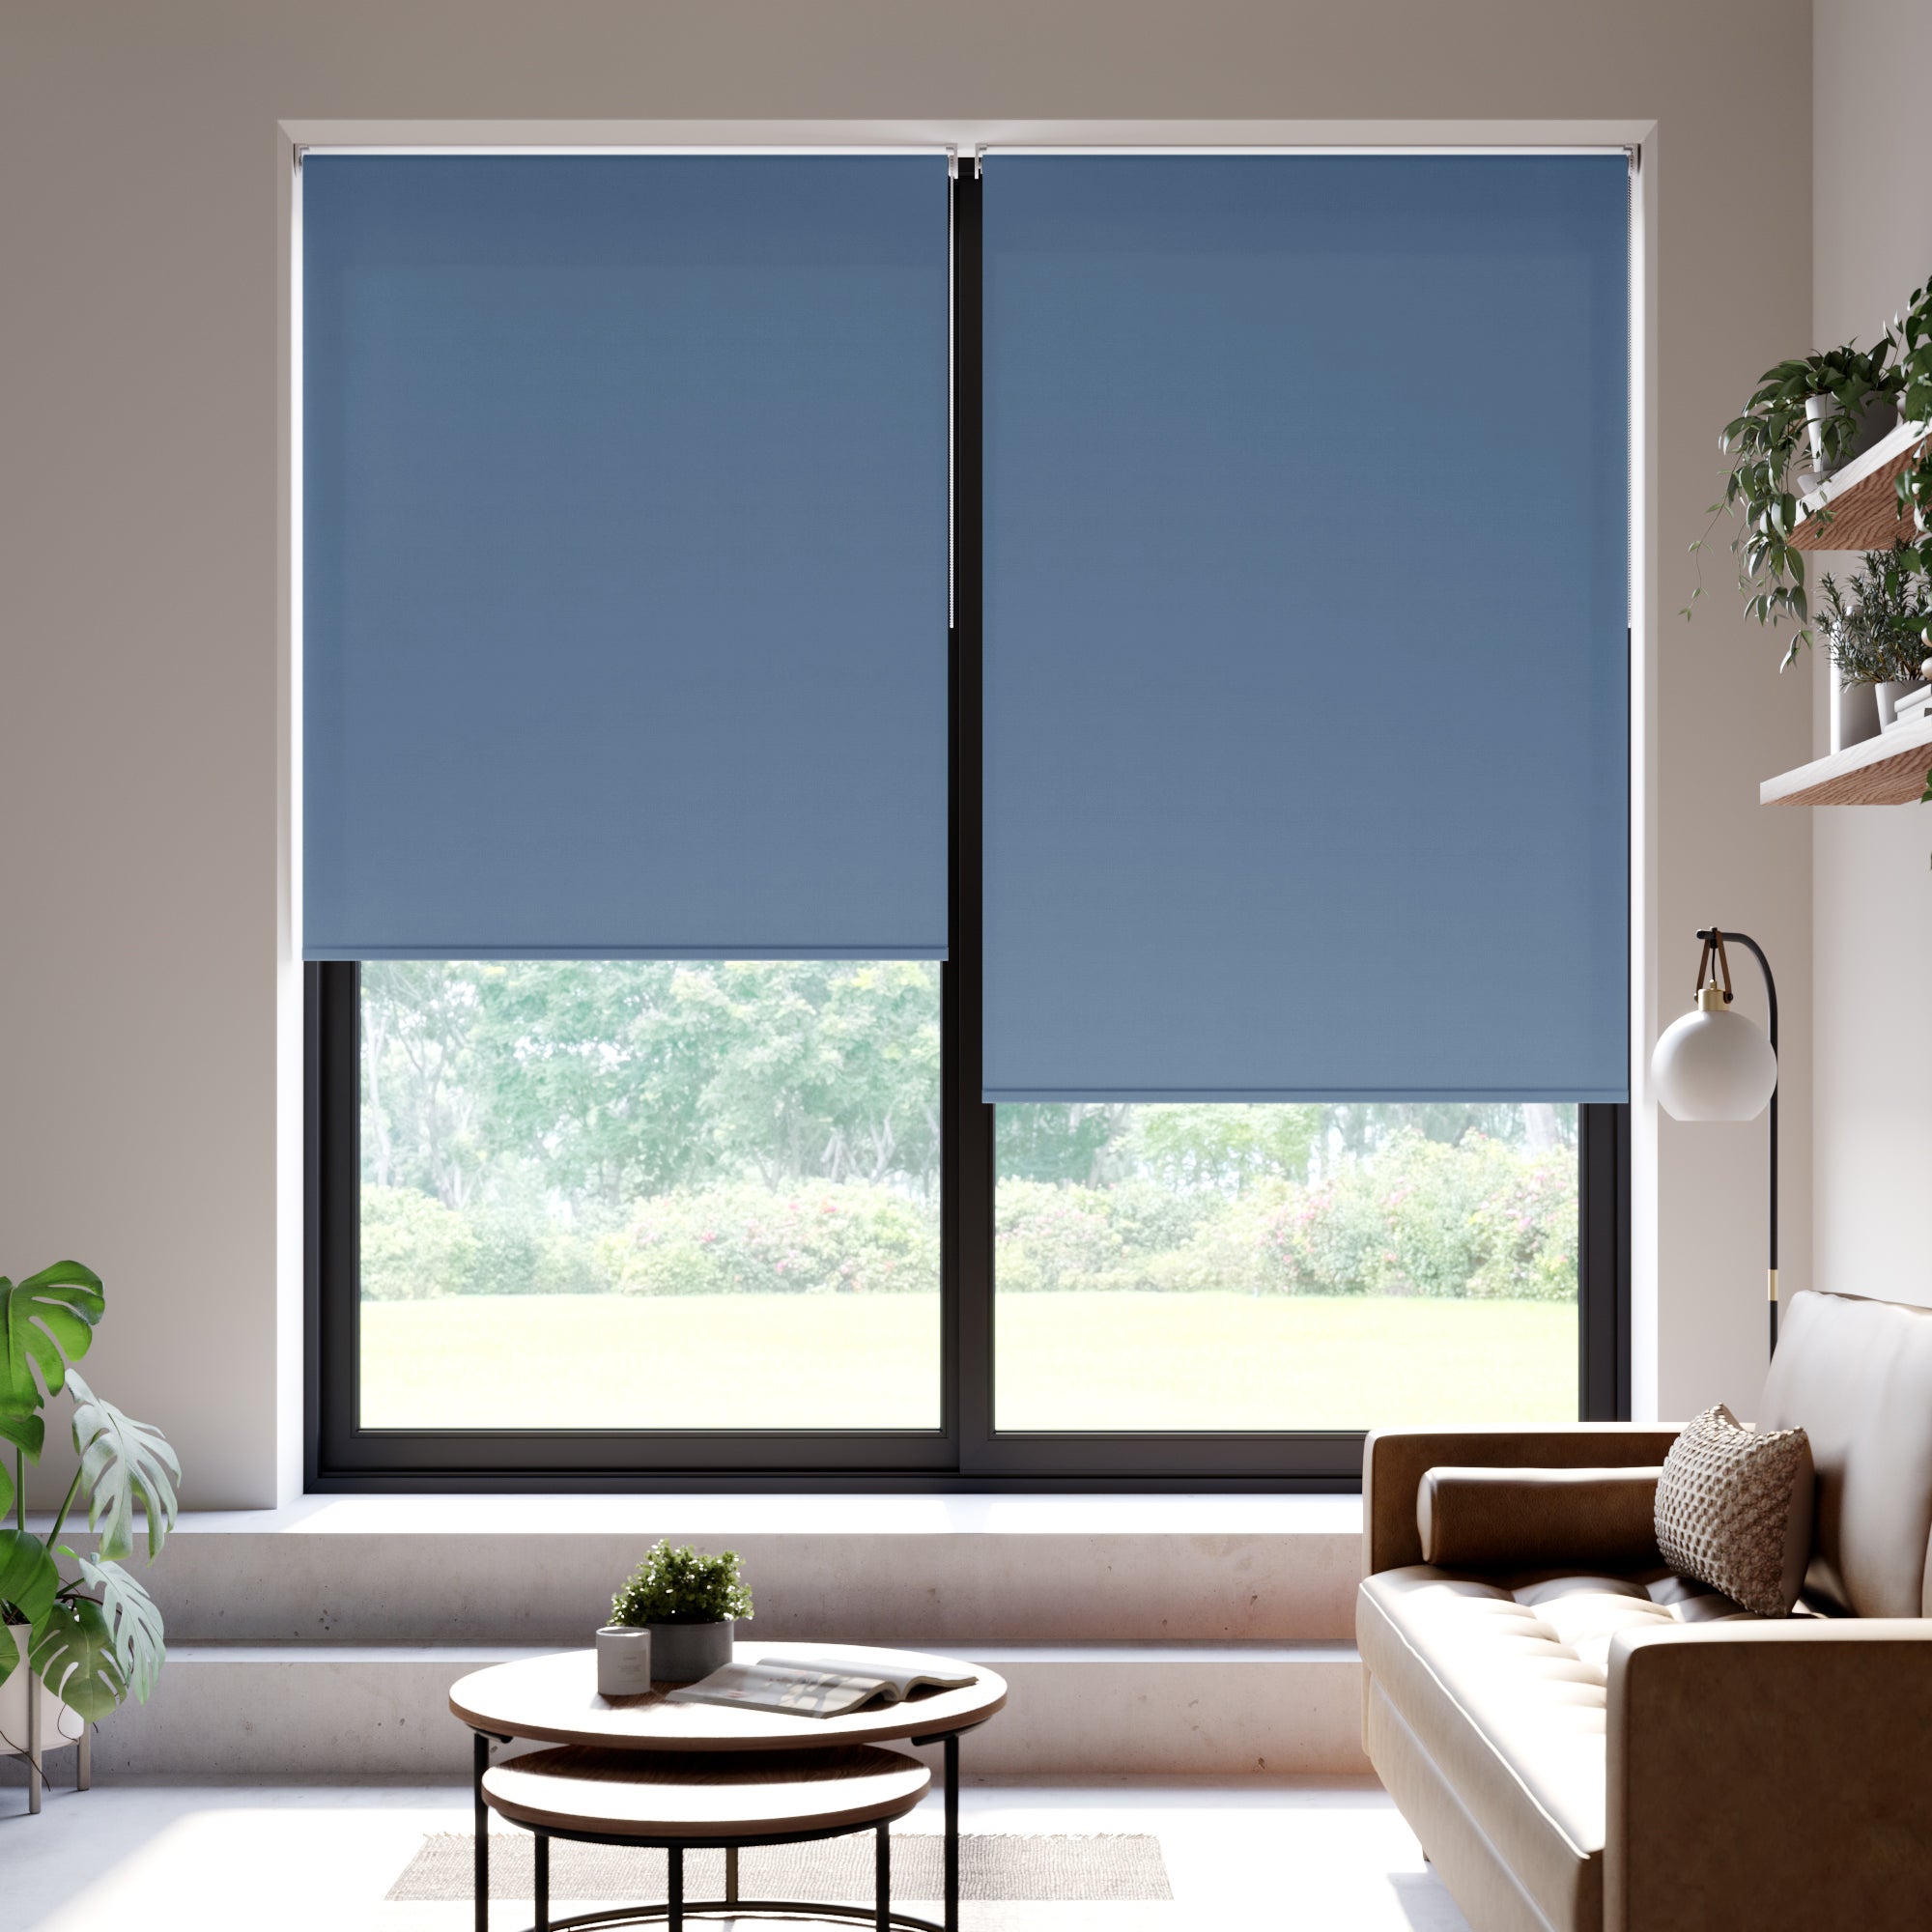 Iona Daylight Made to Measure Flame Retardant Roller Blind Fabric Sample Iona Wedgewood